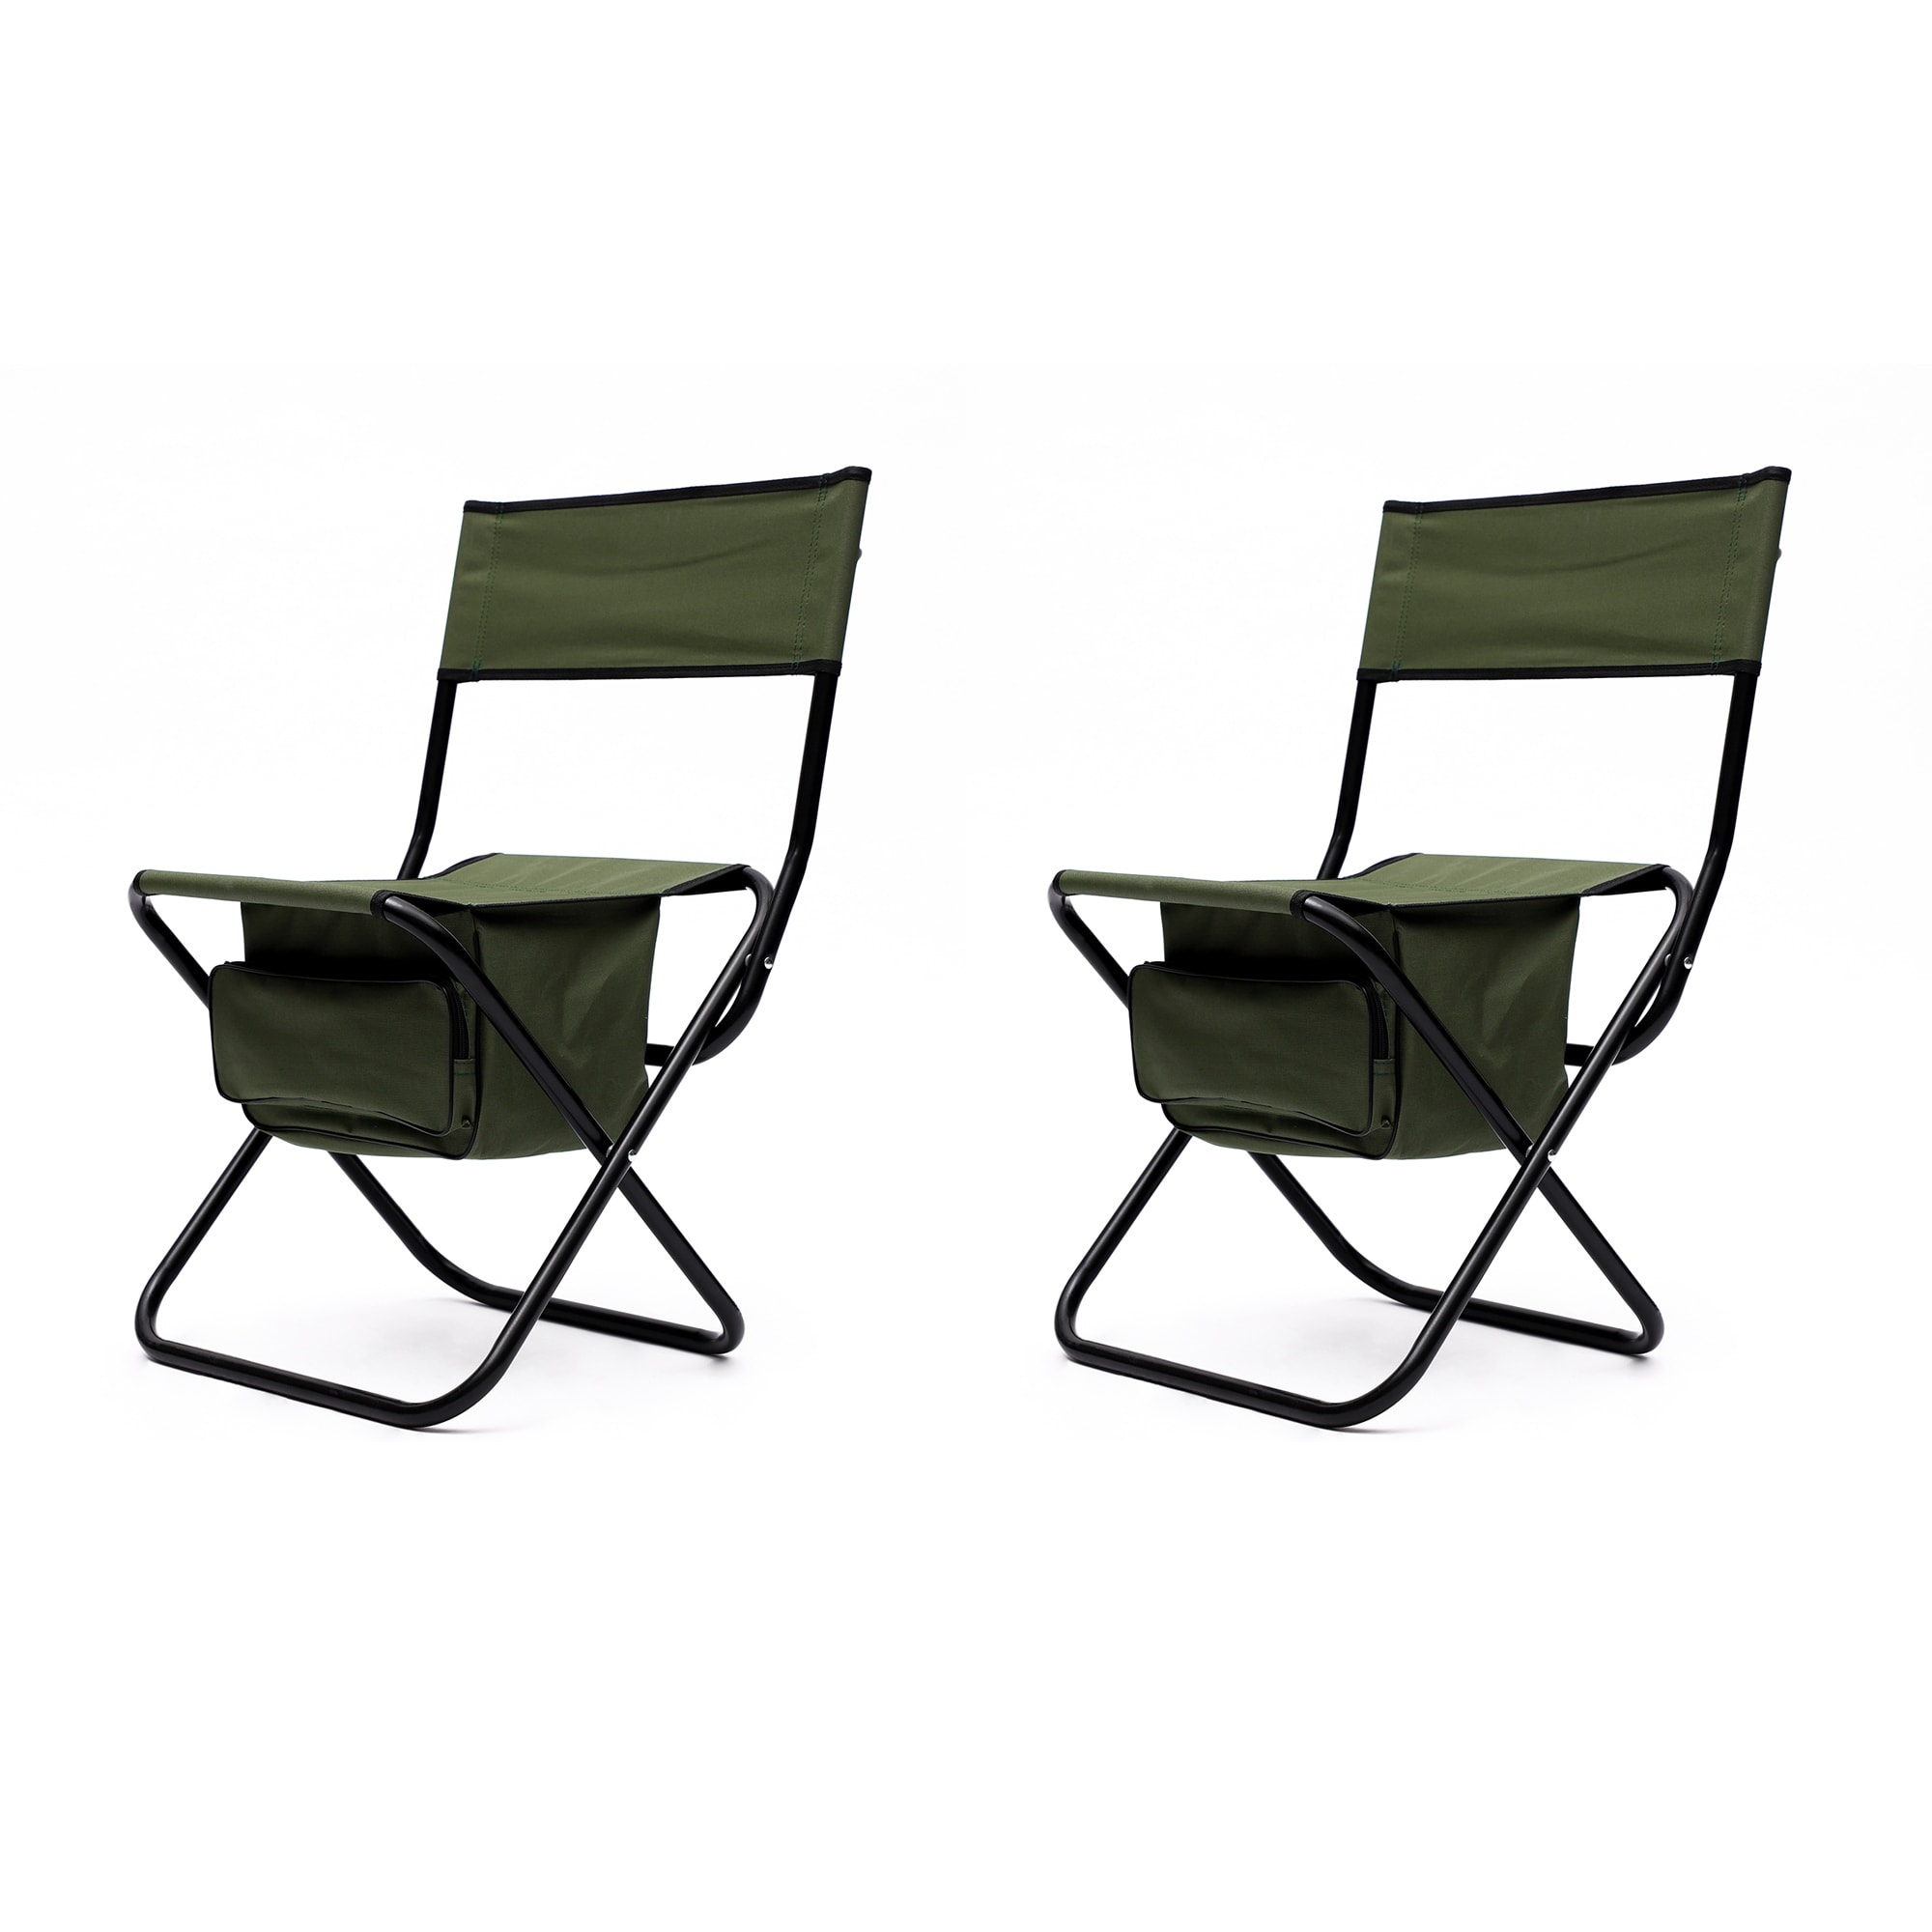 Folding Outdoor Table And Chair Set For Picnics backyard bbq party，set Of 3